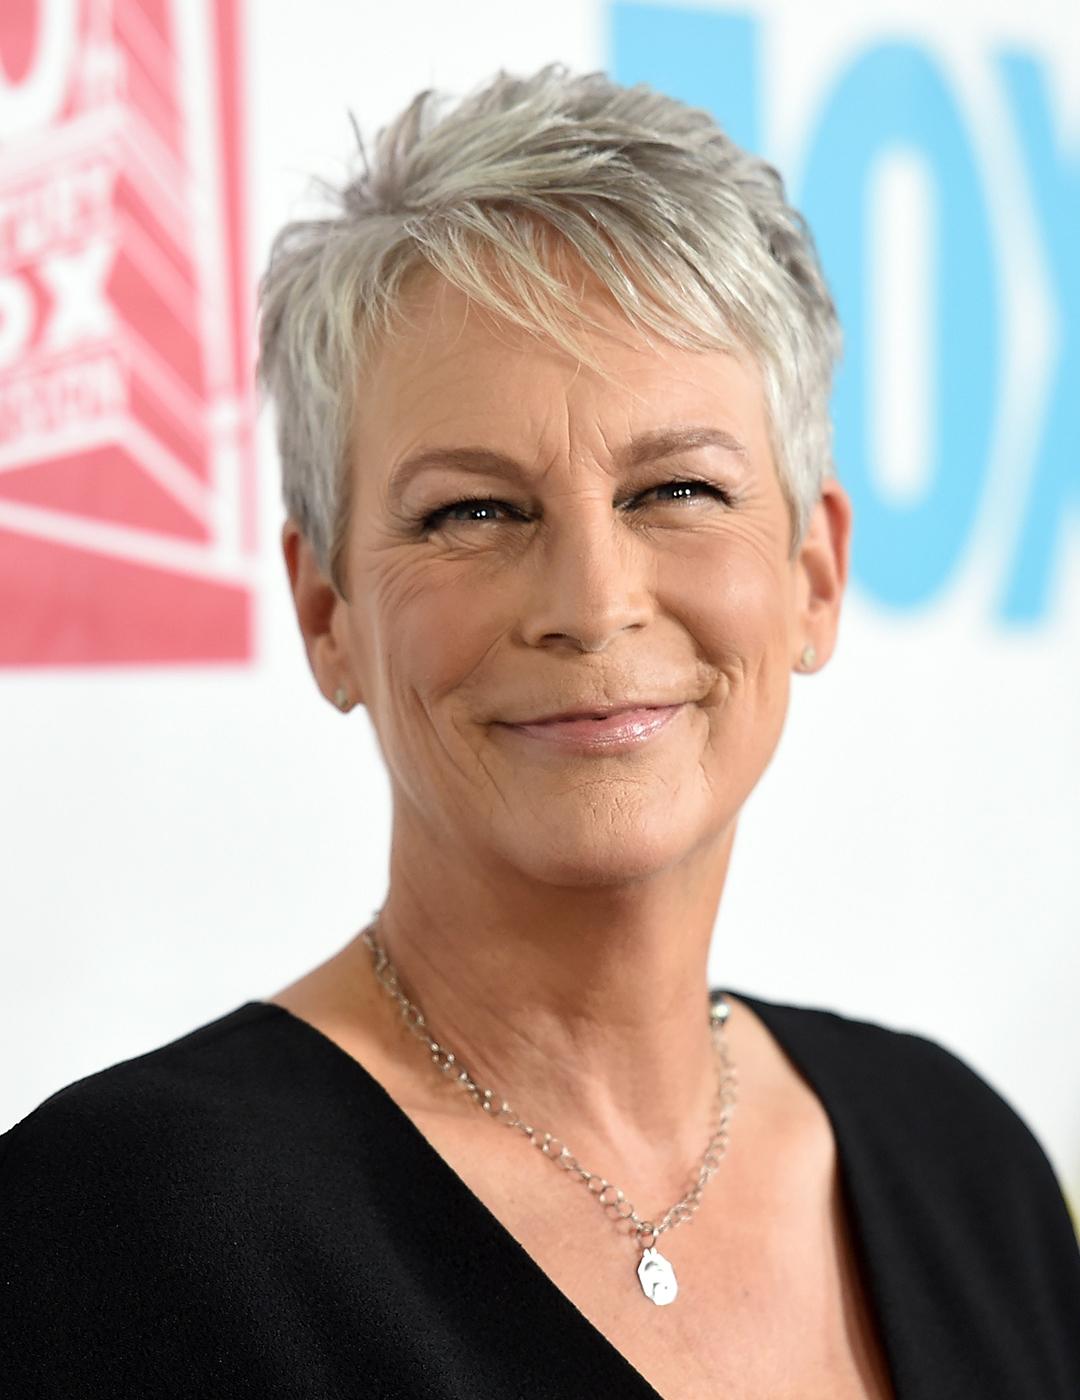 A photo of Jamie Lee Curtis wearing a plunging neckline black dress with wide sleeves and a silver necklace along with her choppy pixie haircut 